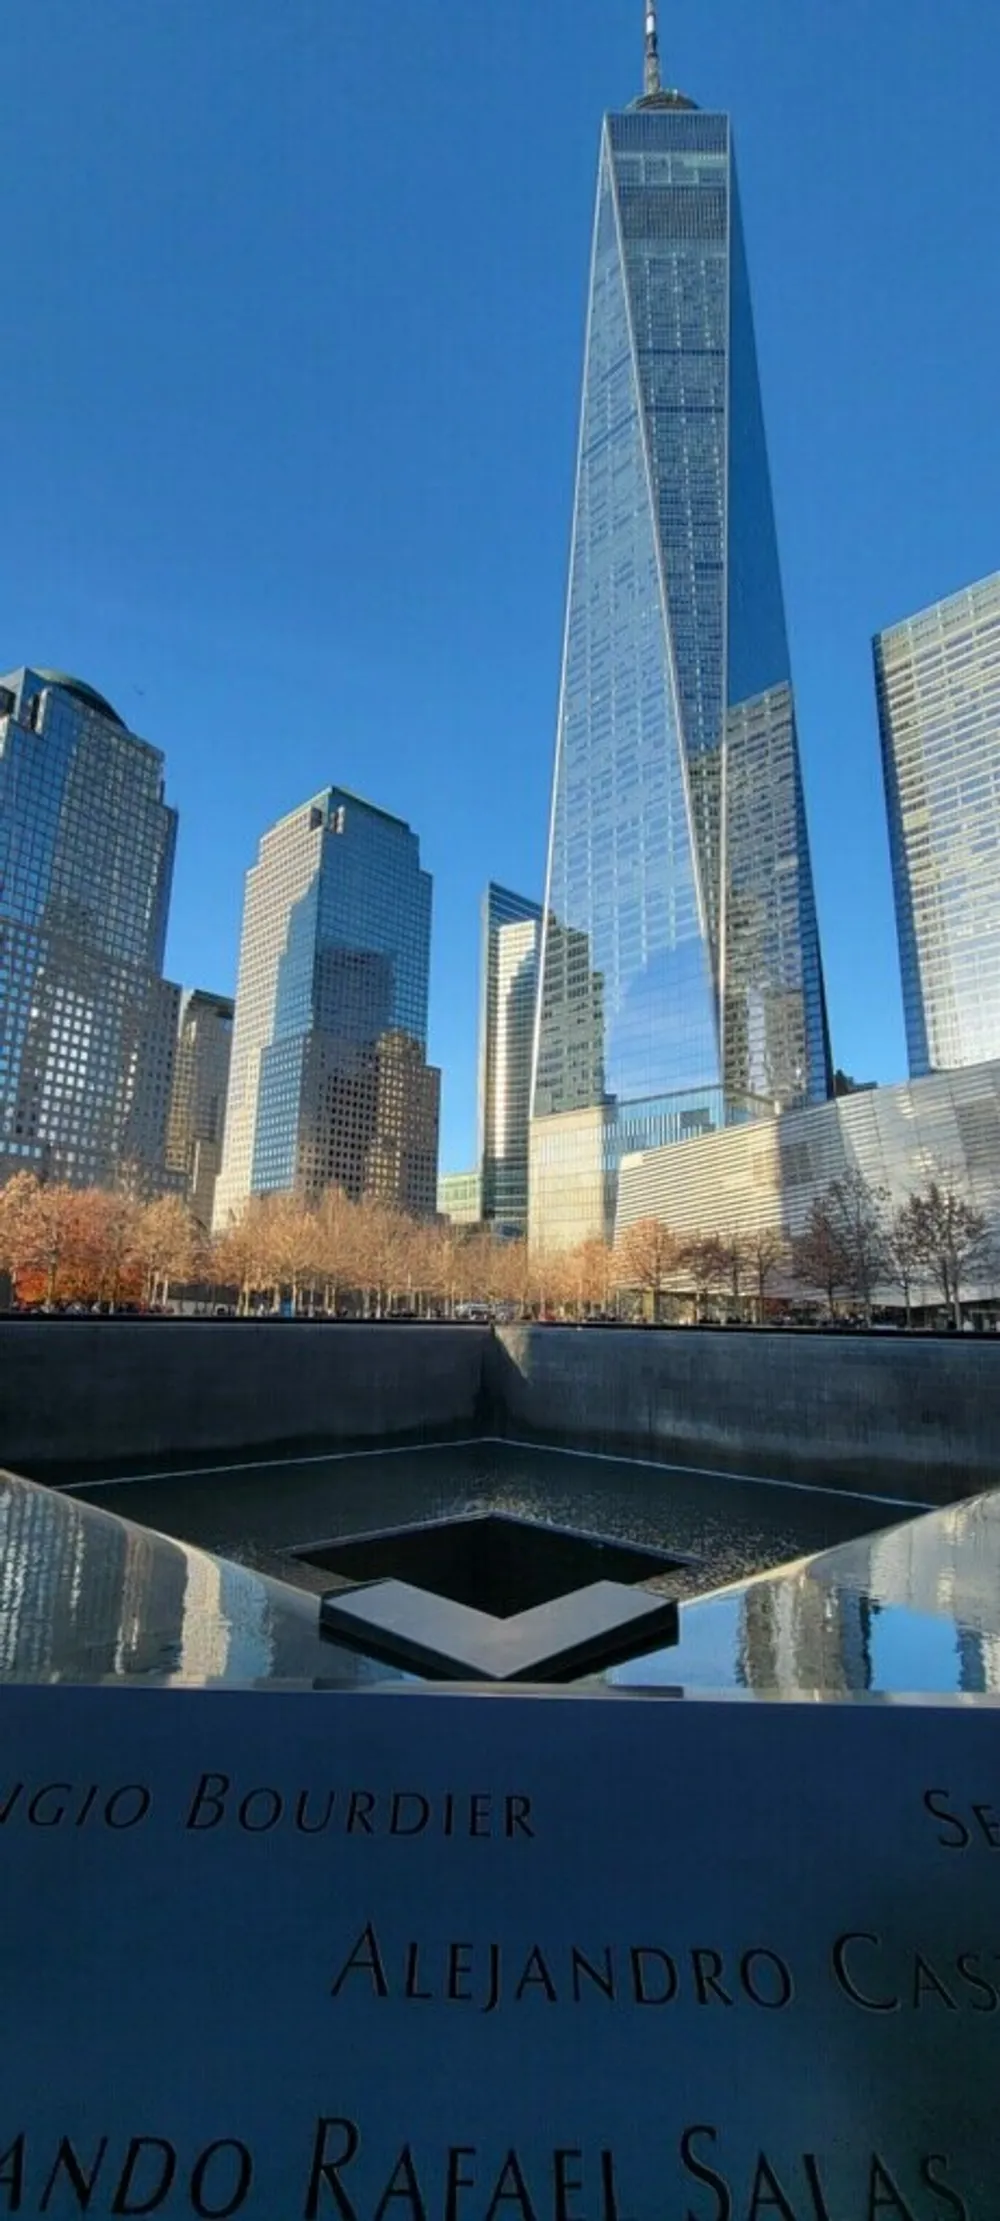 The image displays the One World Trade Center tower standing tall above the 911 Memorial with names of the victims inscribed on the memorials edge under a clear blue sky